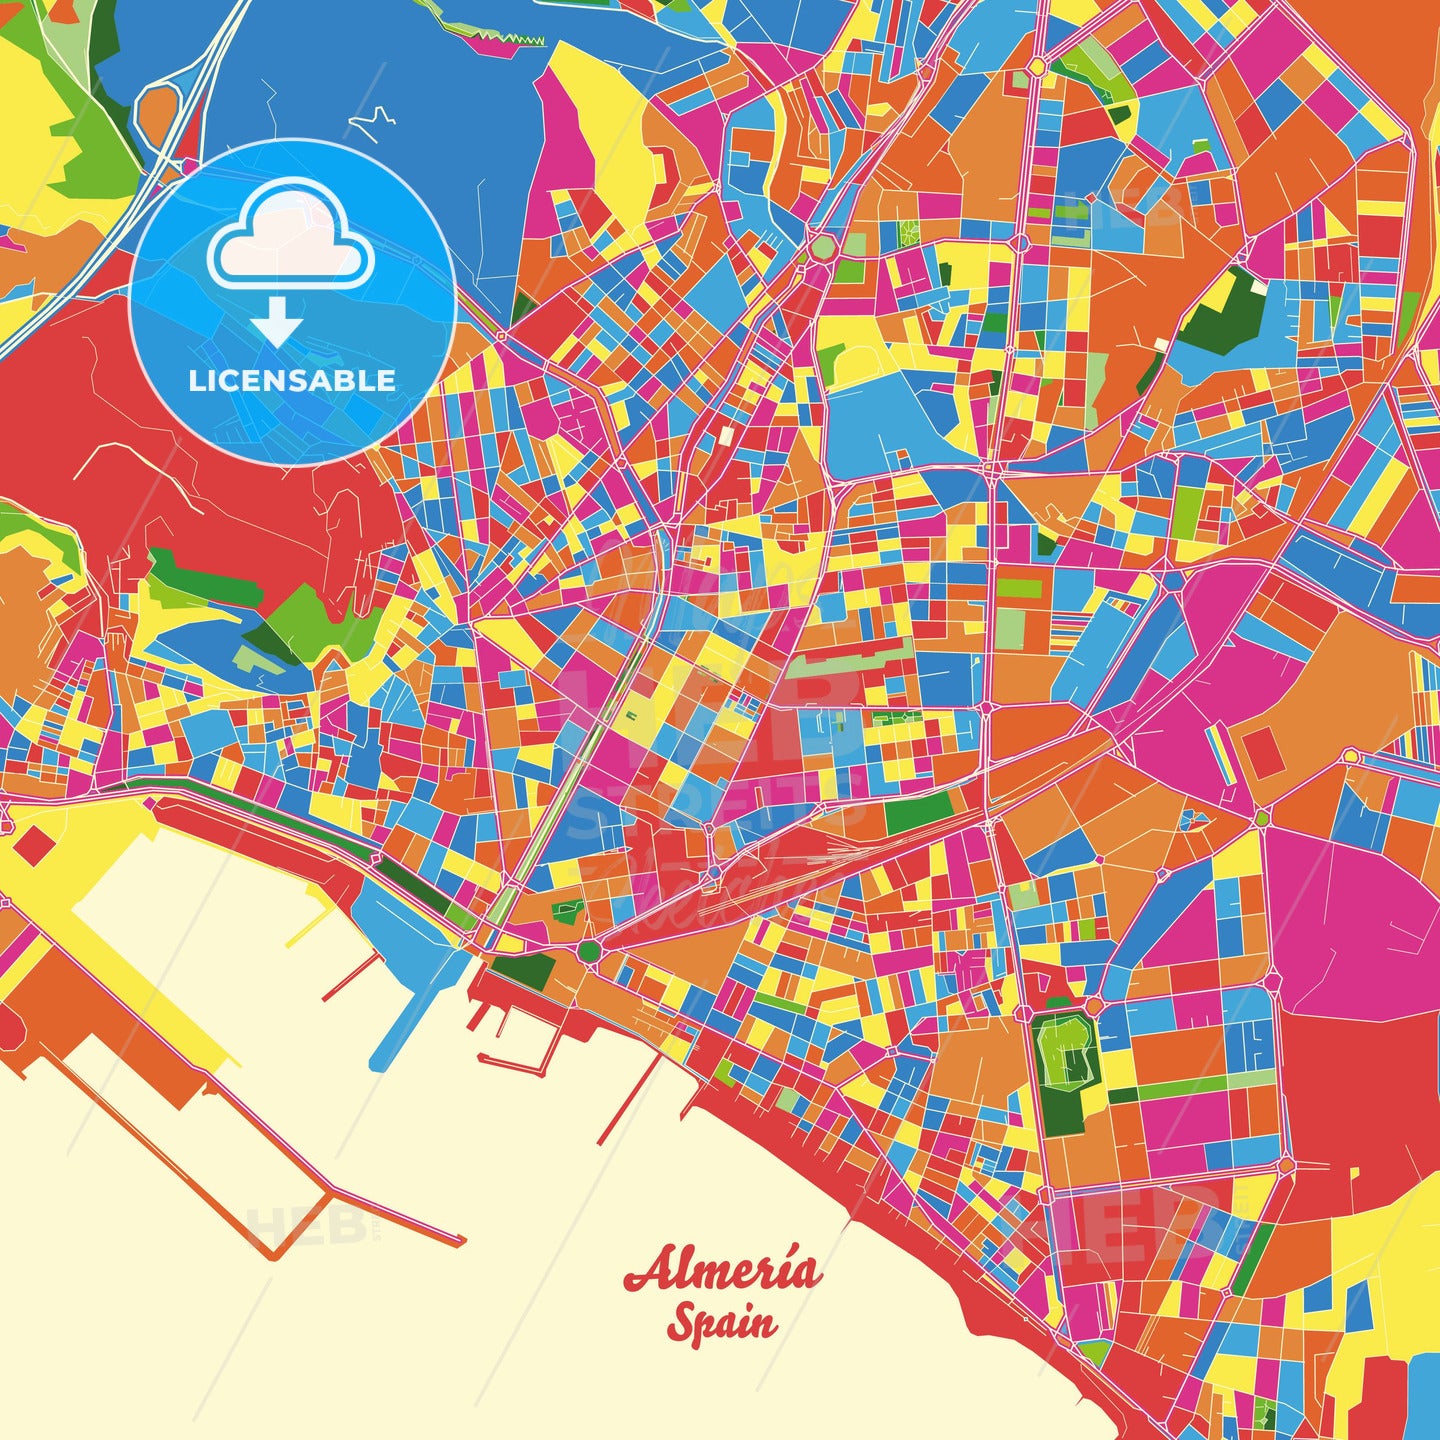 Almería, Spain Crazy Colorful Street Map Poster Template - HEBSTREITS Sketches